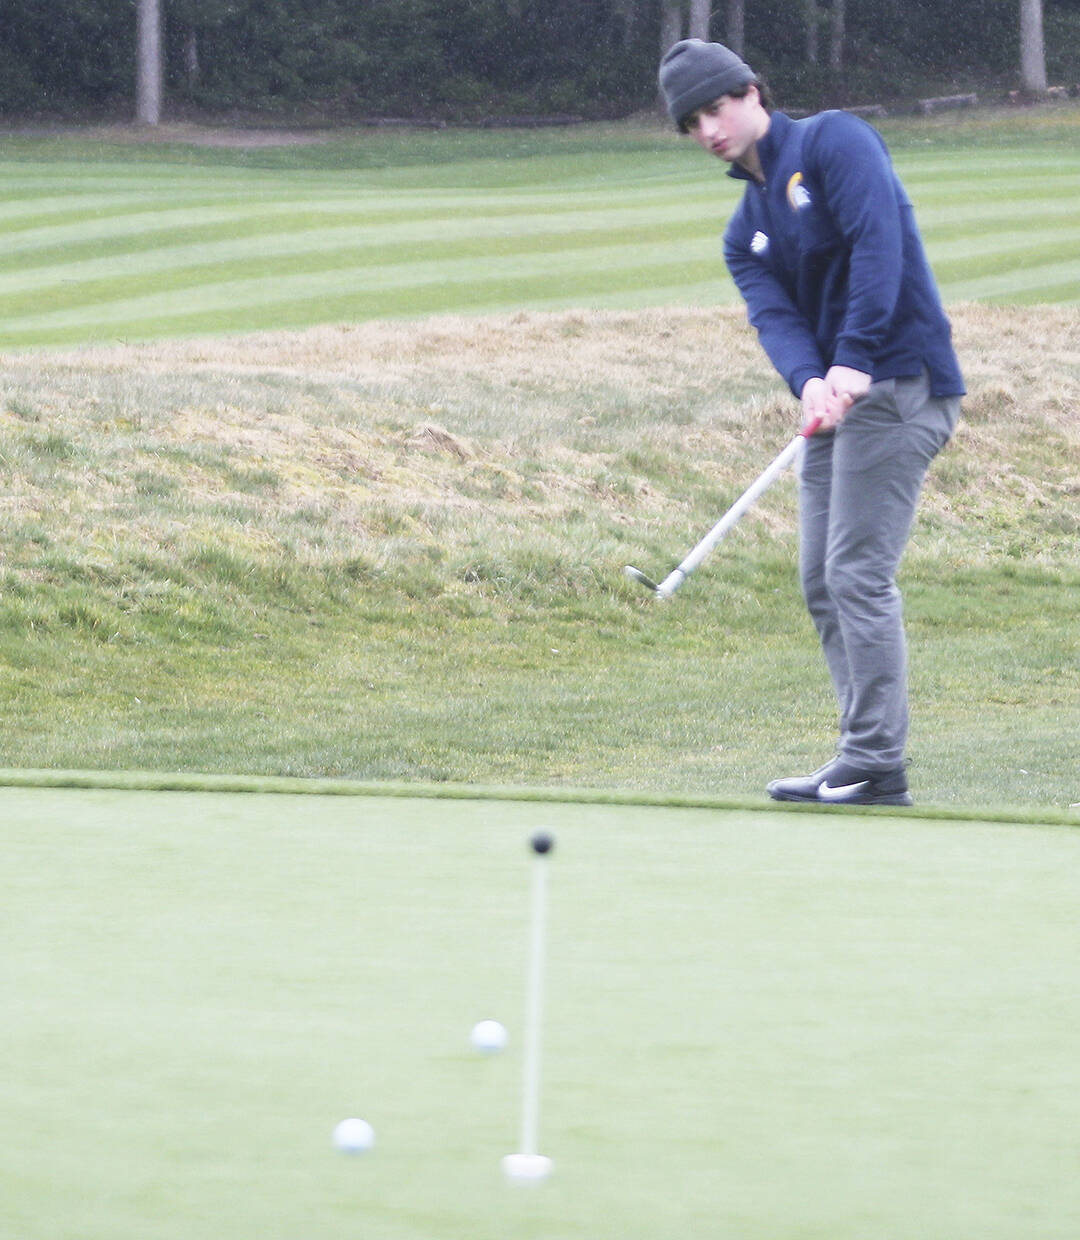 Bainbridge’s Justin Marten practices chipping prior to the match against Kingston.